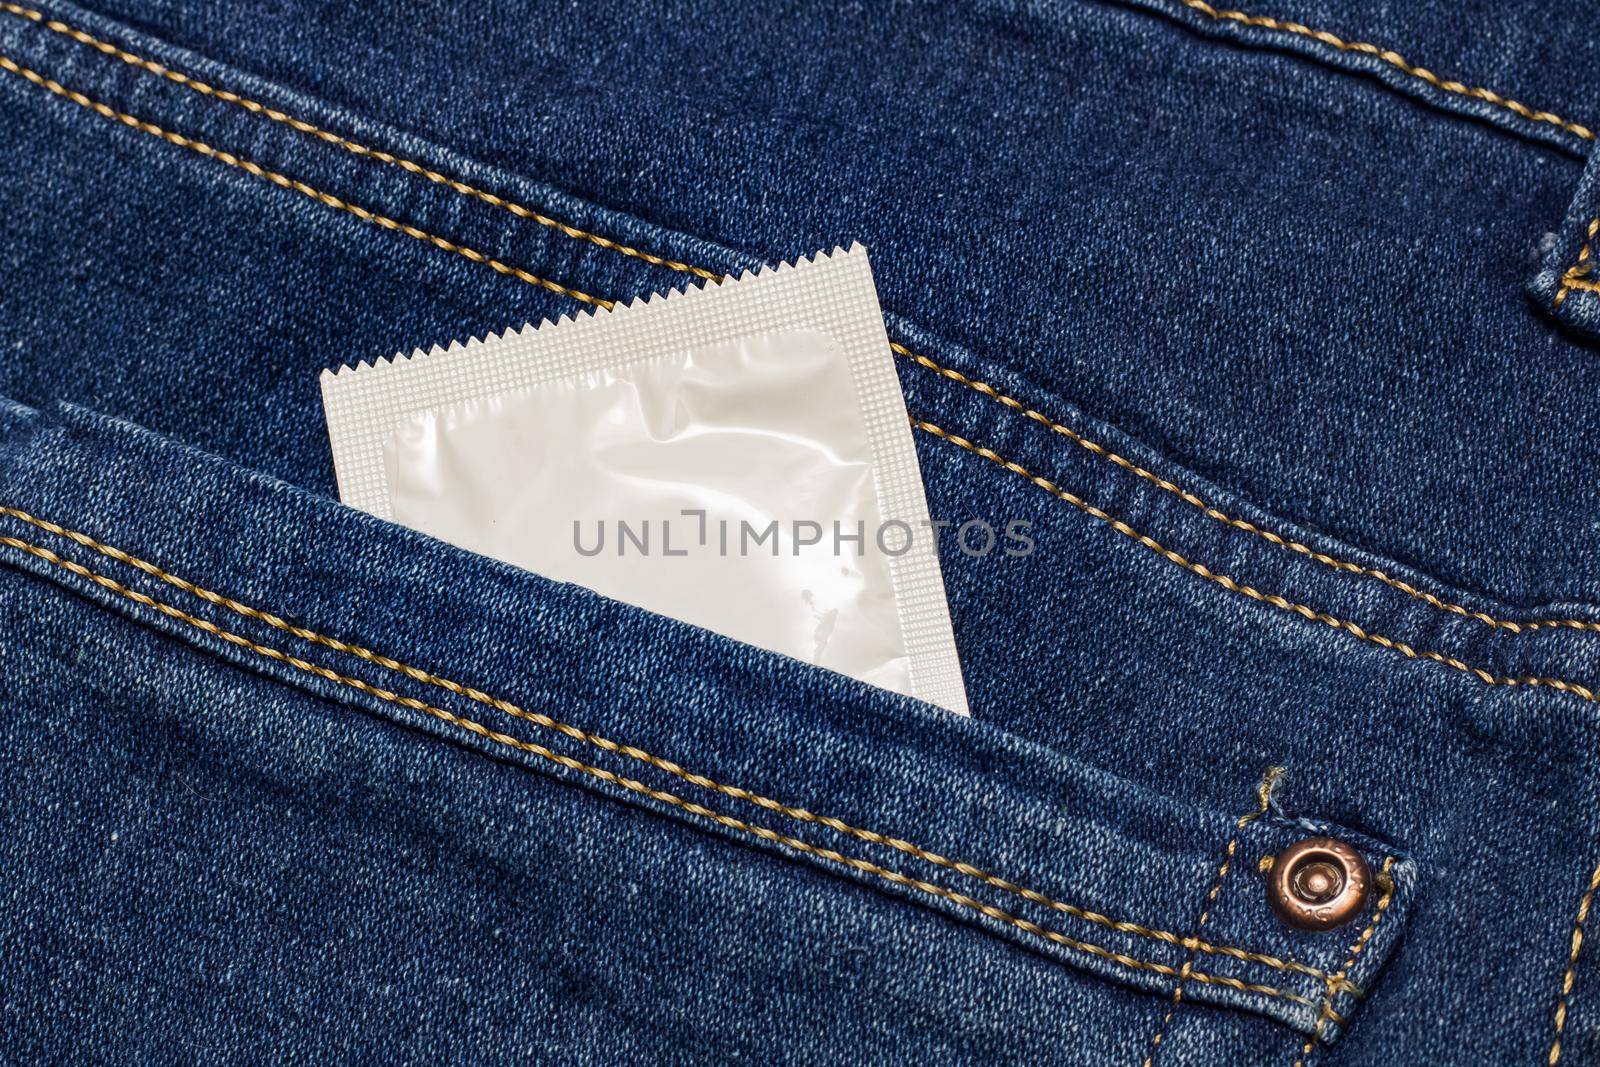 Condom in white packaging in jeans pocket close up